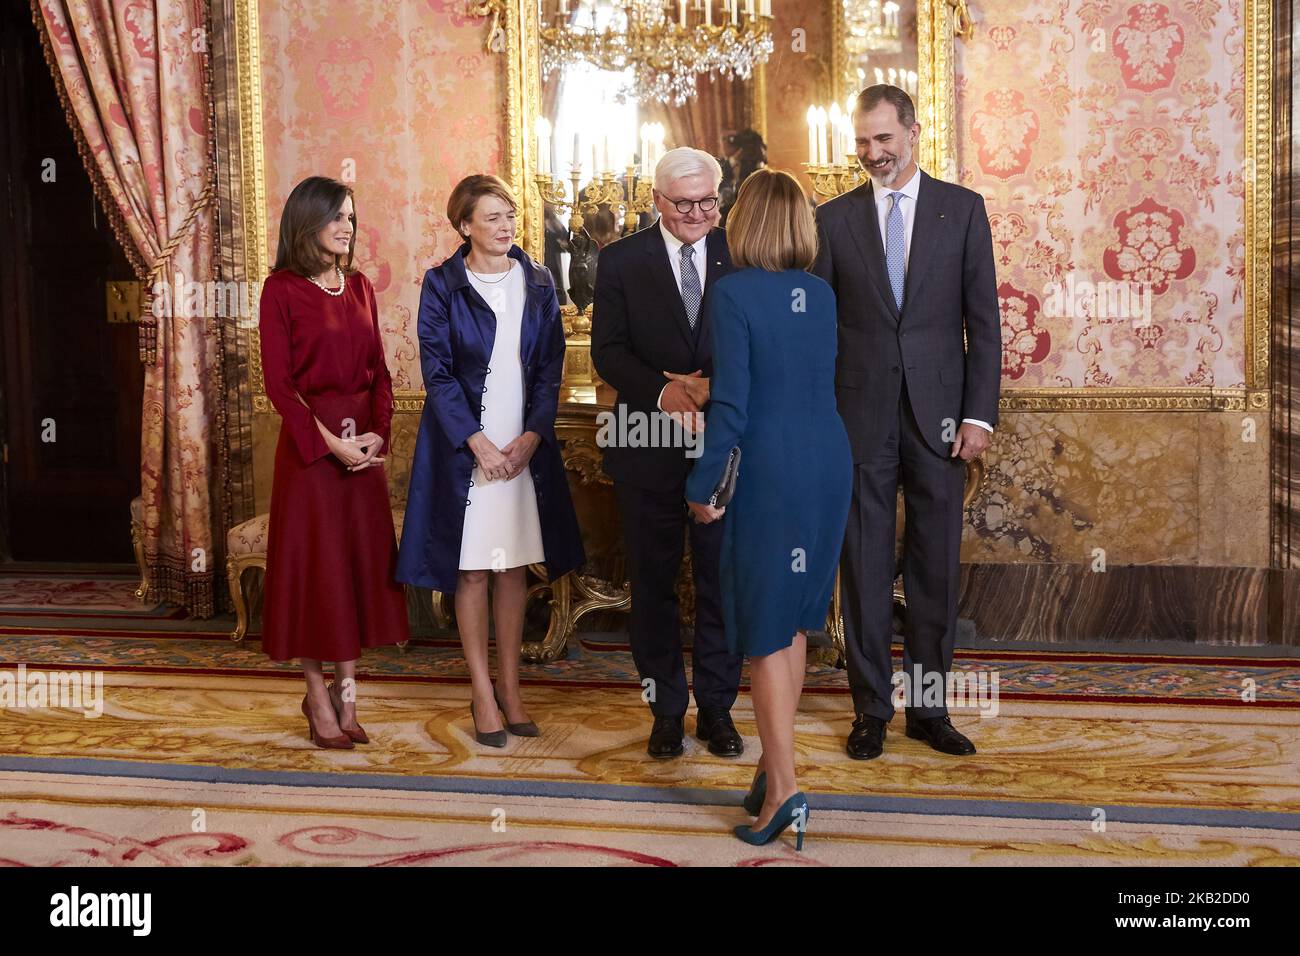 Maria Dolores de Cospedal, King Felipe VI of Spain, Queen Letizia of Spain, Frank-Walter Steinmeier and Elke Buedenbender attends to German President Frank-Walter Steinmeier visit to Spain at Royal Palace in Madrid, Spain on October 24, 2018. (Photo by A. Ware/NurPhoto) Stock Photo